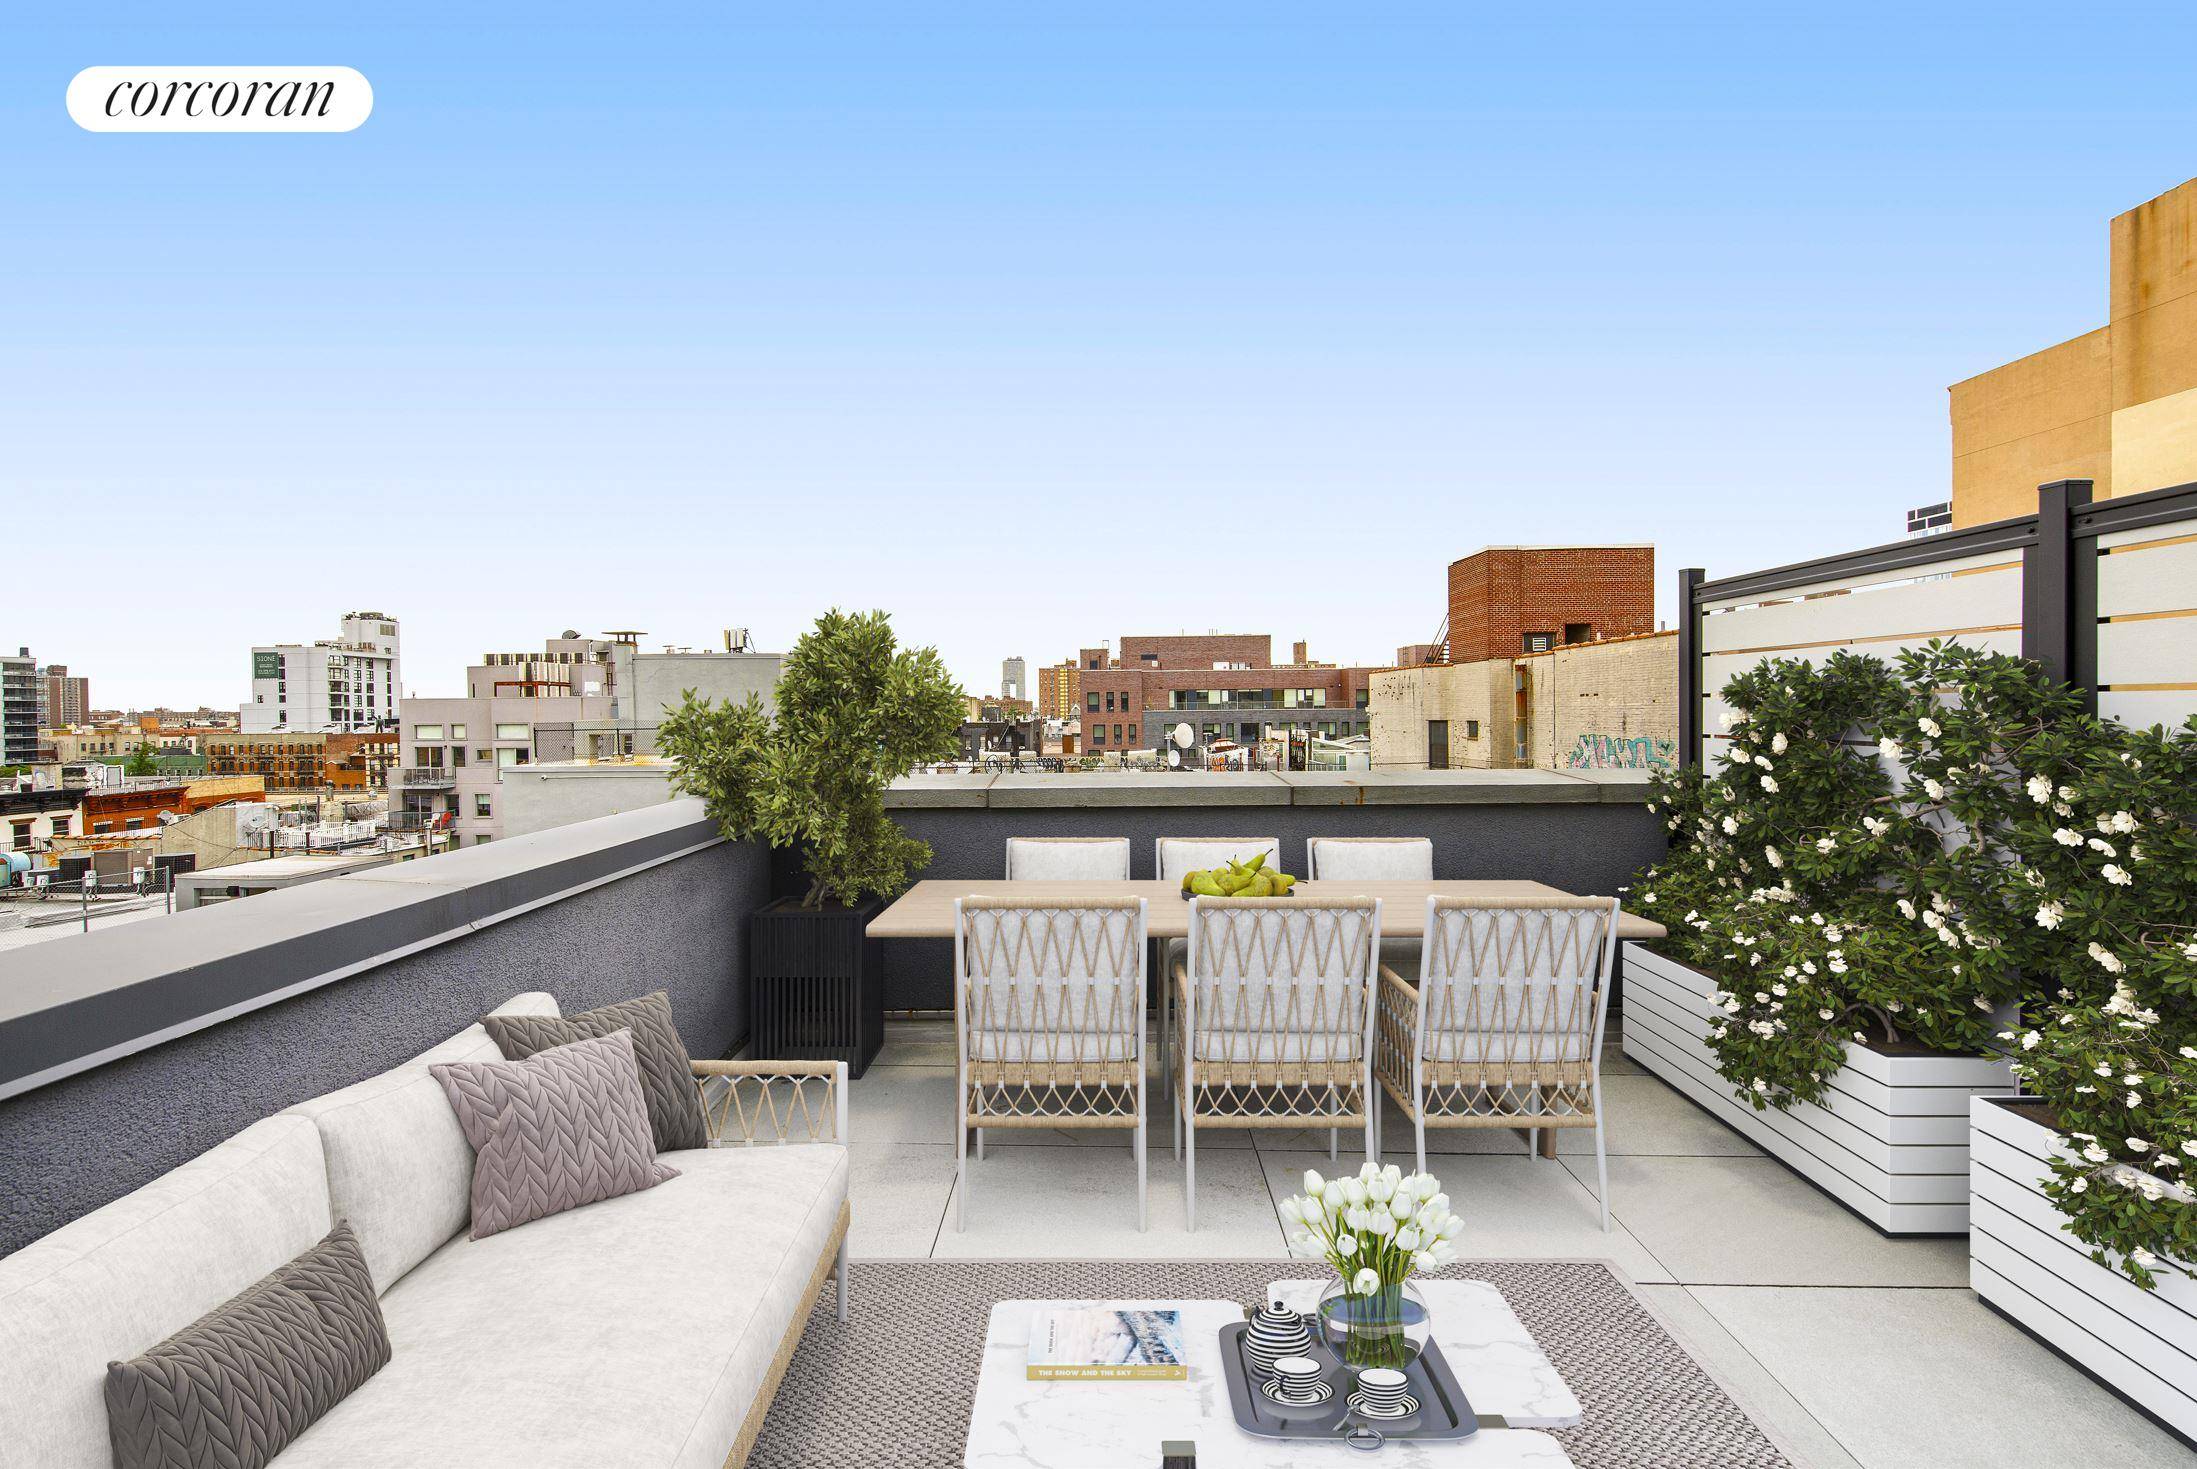 NOW OFFERING 3. 5 ON OUR LAST REMAINING UNIT 147 Ludlow offers a shared rooftop deck with stunning downtown views, bike storage, and a doorman attended lobby.